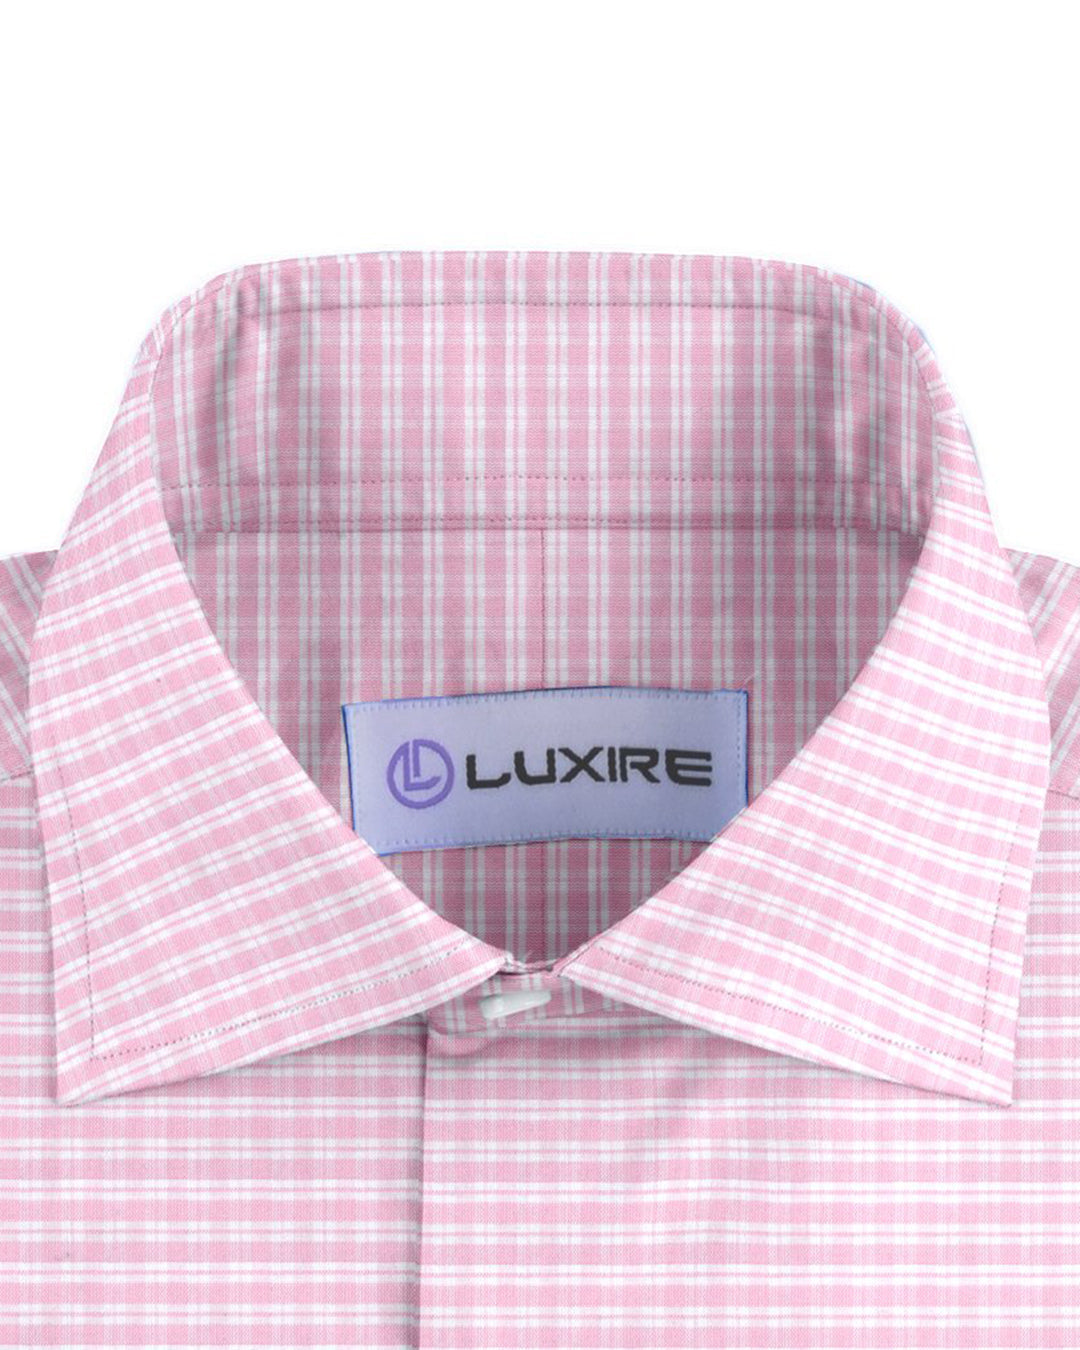 Collar of the custom linen shirt for men in white with light pink checks by Luxire Clothing